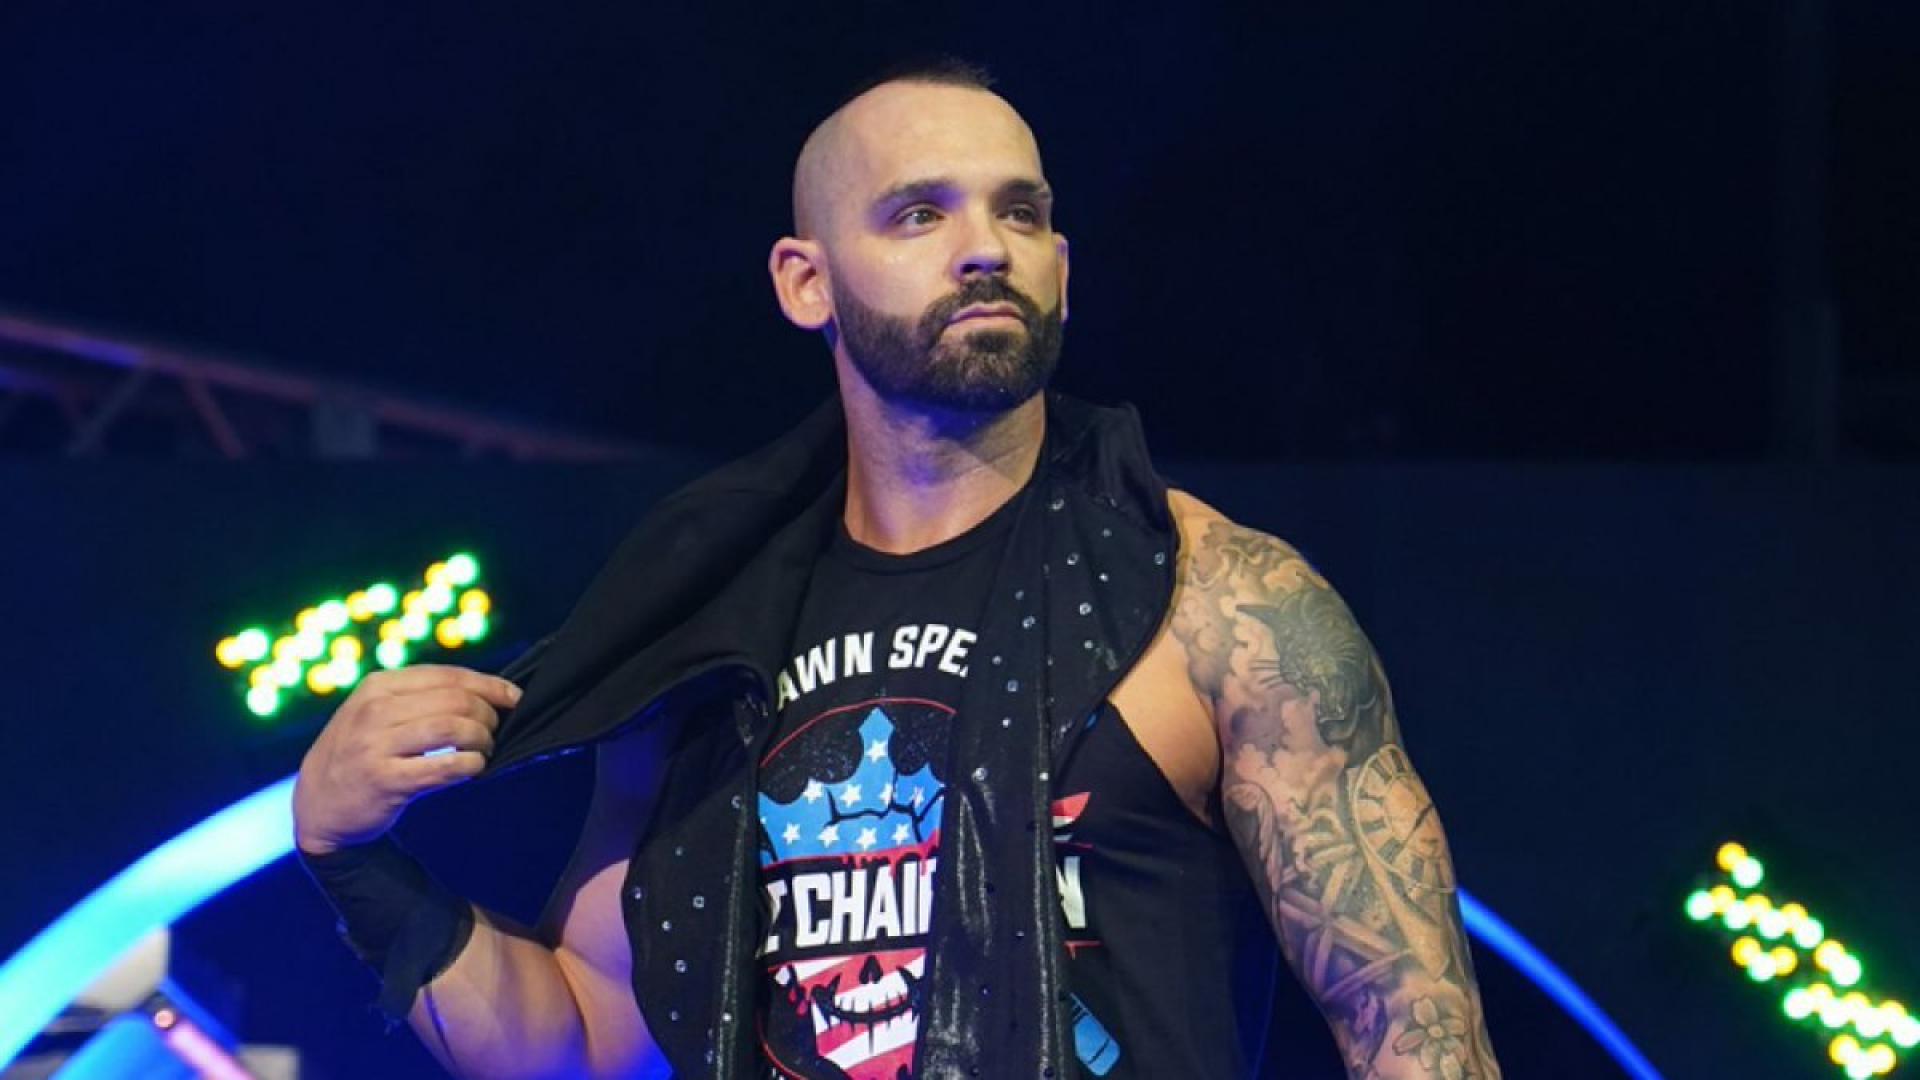 All You Need to Know About Shawn Spears’ Return to WWE on NXT